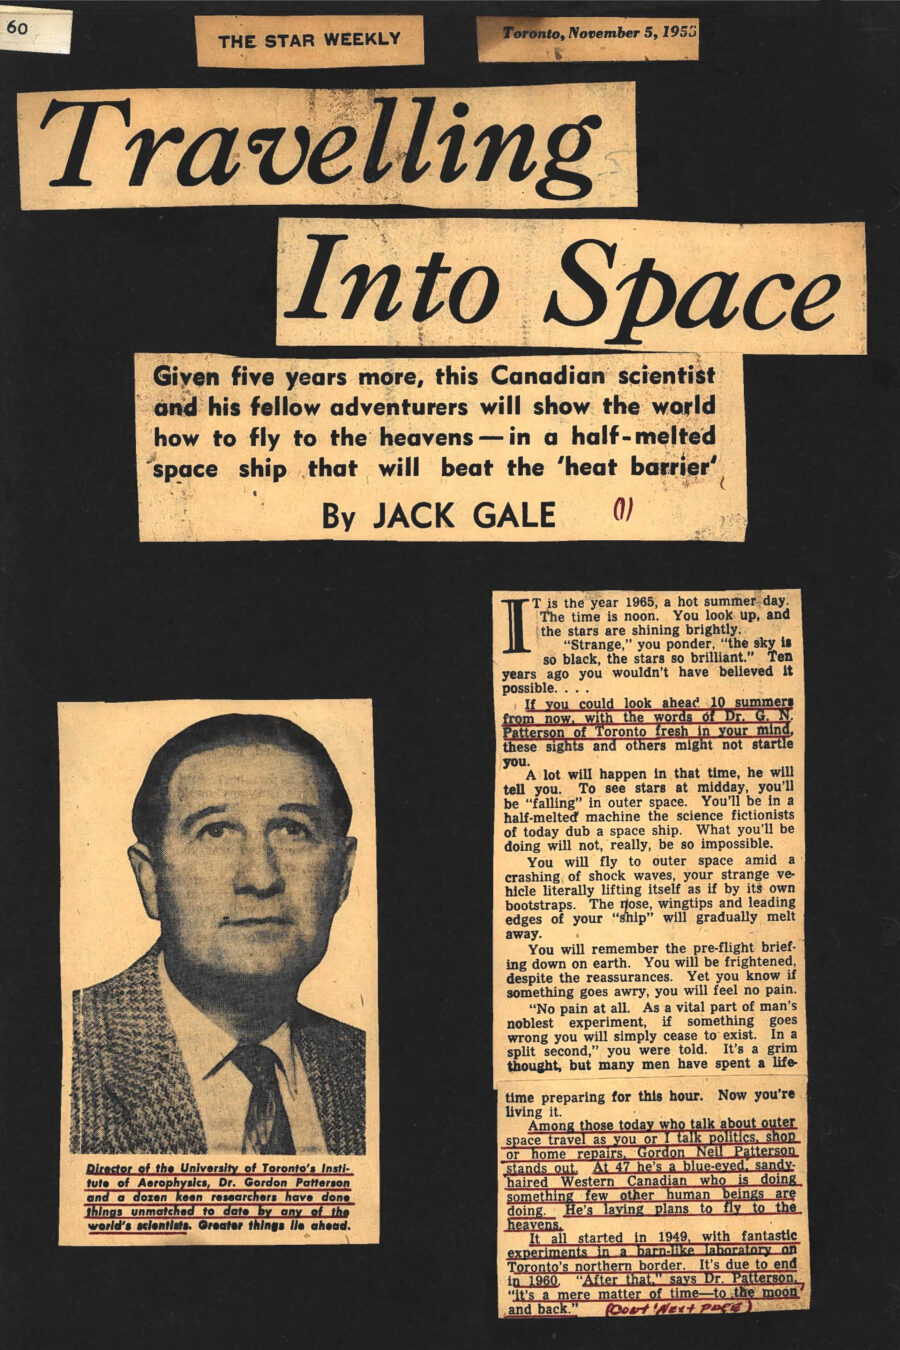 Newspaper clipping from The Star Weekly, November 5, 1955
Headline: Travelling Into Space: Given five years more, this Canadian scientist and his fellow adventurers will show the world how to fly to the heavens – in a half-melted space ship that will beat the ‘heat barrier’
Byline: Jack Gale
Photo 1: Head shot of Dr. Gordon Patterson, wearing a suit jacket, shirt and tie.
Caption: Director of the University of Toronto’s Institute of Aerophysics, Dr. Gordon Patterson and a dozen keen researchers have done things unmatched to date by any of the world’s scientists. Greater things lie ahead.
It is the year 1965, a hot summer day. The time is noon. You look up, and the stars are shining brightly. “Strange,” you ponder, “the sky is so black, the stars so brilliant.” Ten years ago you wouldn’t have believed it possible….
If you could look ahead ten summers from now, with the words of Dr. G.N. Patterson of Toronto fresh in you mind, these sights and others might not startle you. A lot will happen in that time, he will tell you. To see stars at midday, you’ll be “falling” in outer space. You’ll be in a half-melted machine the science fictionists of today dub a space ship. What you’ll be doing will not, really, be so impossible. You will fly to outer space amid a crashing of shock waves, your strange vehicle literally lifting itself as if by its own bootstraps. The nose, wingtips and leading edges of your “ship” will gradually melt away. You will remember the pre-flight briefing down on earth. You will be frightened, despite the reassurances. Yet you know if something goes awry, you will feel no pain. “No pain at all. As a vital part of man’s noblest experiment, if something goes wrong you will simply cease to exist. In a split second,” you were told. It’s a grim thought, but many men have spent a lifetime preparing for this hour. Now you’re living it.
Among those today who talk about outer space travel as you or I talk politics, shop or home repairs, Gordon Neil Patterson stands out. At 47 he’s a blue-eyed, sandy-haired Western Canadian who is doing something few other human beings are doing. He’s laying plans to fly to the heavens. It all started in 1949, with fantastic experiments in a barn-like laboratory on Toronto’s northern border. It’s due to end in 1960. “After that,” says Dr. Patterson, “it’s a mere matter of time – to the moon and back.”
In the University of Toronto’s two-story, half-acre Institute of Aerophysics, with a giant, 40-foot aluminum sphere as a horizon-splitting landmark, Director Patterson and a dozen keen researchers are wasting no time. Even now they’ve done things unmatched by any of the world’s scientists. They’ve simulated subsonic flying conditions; then transonic, then supersonic, then hypersonic. They’ve “flown” into the weird netherland of the aeropause. To get to that height above the earth, they’ve fought their way, experimentally, past the dreaded “heat barrier,” the 50,000-degree stumbling block no one ever knew much about; through to the layer of “monotomic” air, where two-atom molecules of oxygen and nitrogen break up into single atoms; and on up, so high molecules of air are so far apart you rarely hear one bump into your “space ship.”
What’s it like up there? Says Dr. Patterson, “There is no air, for all practical purposes. Therefore sunlight cannot be diffused, and the blueness of the sky fades. Even at twenty-five miles up, the sky will be blackened and the stars will shine. The glare of sunlight off the surfaces of your ‘space ship’ will be blinding, bad enough to damage your eyes unless special precautions – such as special glasses – are employed. Again, at twenty-five miles up, the ultraviolet sun rays – the kind that sunburn – will be ten to fifty times stronger than at the earth’s surface. This can be coped with, but an even worse threat will be cosmic radiation, consisting of sub-atomic particles bombarding your ship at tremendous speeds. Thick metal will not hold them back. Present-day thinking holds that short exposure to cosmic rays won’t harm you. But it’s uncertain what they’ll do to space-travellers.”
Will you roll around in your space ship, weightless from loss of gravity? “You will be ‘weightless,’ but not from non-gravity. Weightlessness in outer space is due to the direction you travel in, the ‘free fall’ a space ship follows,” says Dr. Patterson. “A typical flight into space will see first a short ‘blast off’ under heavy acceleration. This will be followed by ‘free fall,’ a bullet-like trajectory reaching hundreds of miles above the earth, ended by a supersonic glide back into the lower regions of the atmosphere.” And, he adds, an accident during the “blast off” or shortly after, even above twelves miles altitude, could be disastrous. Normal body blood pressure, compared with outside “air pressure,” is so low your blood would literally boil if you went unprotected.
Big, plain-talking Gordon Patterson received his bachelor of science degree at the University of Alberta twenty-four years ago. He came to Toronto via the United Kingdom’s Royal Aircraft Establishment at Farnborough, Australia’s Council for Scientific and Industrial Research at Melbourne, the United States jet propulsion laboratory at the California Institute of Technology, and a bevy of educational fellowships, chairmanships and directorships. In January, 1949, he was made director of the Institute of Aerophysics – unique in Canada in both name and function – and went to work with a pair of grants from Canada’s Defence Research board. The institute took over a hangar-like building at Downsview airport, near Toronto.
He says, “Our chief work is basic, or pure, investigational research. But we must, at the same time, train scientific personnel for work in aerophysics, do the research, then develop practical applications which arise.” They’ve succeeded, so much so the institute has become a constant “stop-off” point for the world’s scientists who visit Canada. Not long ago a United States group, who came to marvel at Canada’s embryo flying saucer development, toured the institute and came away much pleased at what they saw and heard. The institute’s personnel have build and experimented with two “shock” tunnels and three wind tunnels, the last termed a “low-density supersonic wind tunnel” and capable of operating at pressures ten times lower than the only other two low-density tunnels in the world, both in the United States. 
They’ve discovered many interesting things. In the course of doing so, the calculations they became involved in required the use of the University of Toronto’s electronic “brain,” the FERUT. They know the highest any jet plane can ever fly will be fifteen miles, for jet engines gulp air to burn oxygen with jet fuel. Hitler’s dreaded V-2 rocket went higher, but carried its fuel components with it – alcohol and liquid oxygen in separate tanks.
To free itself of earth’s tight grip of gravity, a space ship must shoot past the 25,000-mph mark, and swing off like a whirling stone from a suddenly snipped string. But at a mere 3,000 mph, no known metal or alloy of metals remains solid. Says Dr. Patterson, “The ‘space ship’ of a few years hence will be built of the best heat-resisting skins we know of, but it will ‘melt,’ because it will be designed to melt. The leading surfaces, forward points, will be constructed so that, as the ship passes through the ocean of atmosphere to the thinness beyond, it will burn up at these points. Yet enough will remain to continue flying.”
As the space ship zooms upward at hypersonic rates to the aeropause, 75 to 125 miles above the earth, the fierce shock waves that tumble into each other like so many Rip Van Winkle bowling pins will create even greater problems. Says Dr. Patterson, “At earth’s surface, sound travels at 760 mph. As you go higher, the air is lighter, and sound travels more slowly. Therefore you do not have to go so fast, in a relative sense, to break through the barrier of sound as you go higher. But, at any point, the speed you go when you break the barrier is Mach 1. Then the waves of sound from the ship’s surface build up to a ‘wall’ or ‘barrier’ through which extra bursts of energy – and special airfoil designs – are needed to carry the ship. These are shock waves, and they will tear the ordinary craft to bits. But from our studies we’ve shown shock waves will do something else. Shock waves will leave a trail of ionized particles that, like so many coils on an electromagnet, with produce a magnetic field. The problem is, then, simple. Somehow, some way, we must utilize this field to give added ‘life’ to the space ship. It will draw itself up, magnet-like, by its own bootstraps.”
Make no bones about it, Dr. Patterson and his co-workers will solve this problem, as they have many others. They may not fly to the heavens themselves, but they will show the world how to do it. “that’s our job, to show how it can be done. We’re confident we can do it. We give ourselves five more years of research,” he says. “We are dealing in pure research, not applied. That is, we are out to provide the charts, graphs, theories and predictions of space travel, from the earth’s surface to the beyond. When we’ve done that, it remains only a question of dollars and determination, work and time. We’ll have the plans ready. Five more years after that, maybe it will happen. Perhaps longer.”
And then? Man can look down as well as up, Dr. Patterson feels. Take the pipe-like, red-painted shock tunnels where, every day, his scientists are developing temperatures beyond 50,000 degrees, hotter than the sun’s surface. Down these tunnels speed shock wave after shock wave, as cellulose and metal diaphragms snap and instantaneous instruments yield volumes of facts by split-second readings. “In industry, such a shock tunnel is already producing products never before heard of. Heat causes chemicals to react differently from normal, and new materials are the result,” says Dr. Patterson. “This is a field only just opening up. Science is still the land of adventure.”
Not mention that he, himself, is one of the boldest adventurers of all.